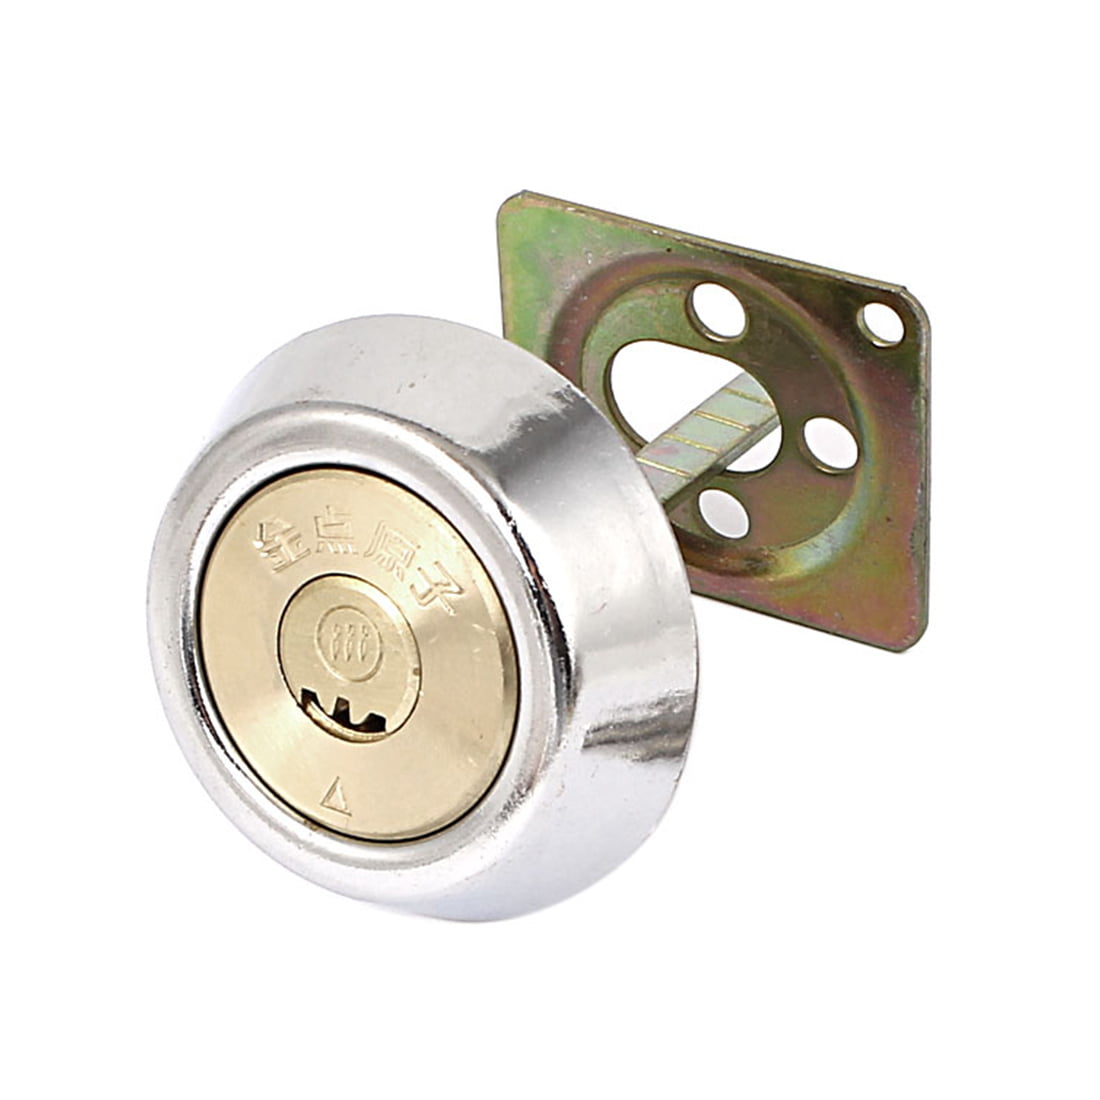 Details about   Copper Lock Core Key Interior Wood Door Bedroom Office Gate Anti-theft Security 